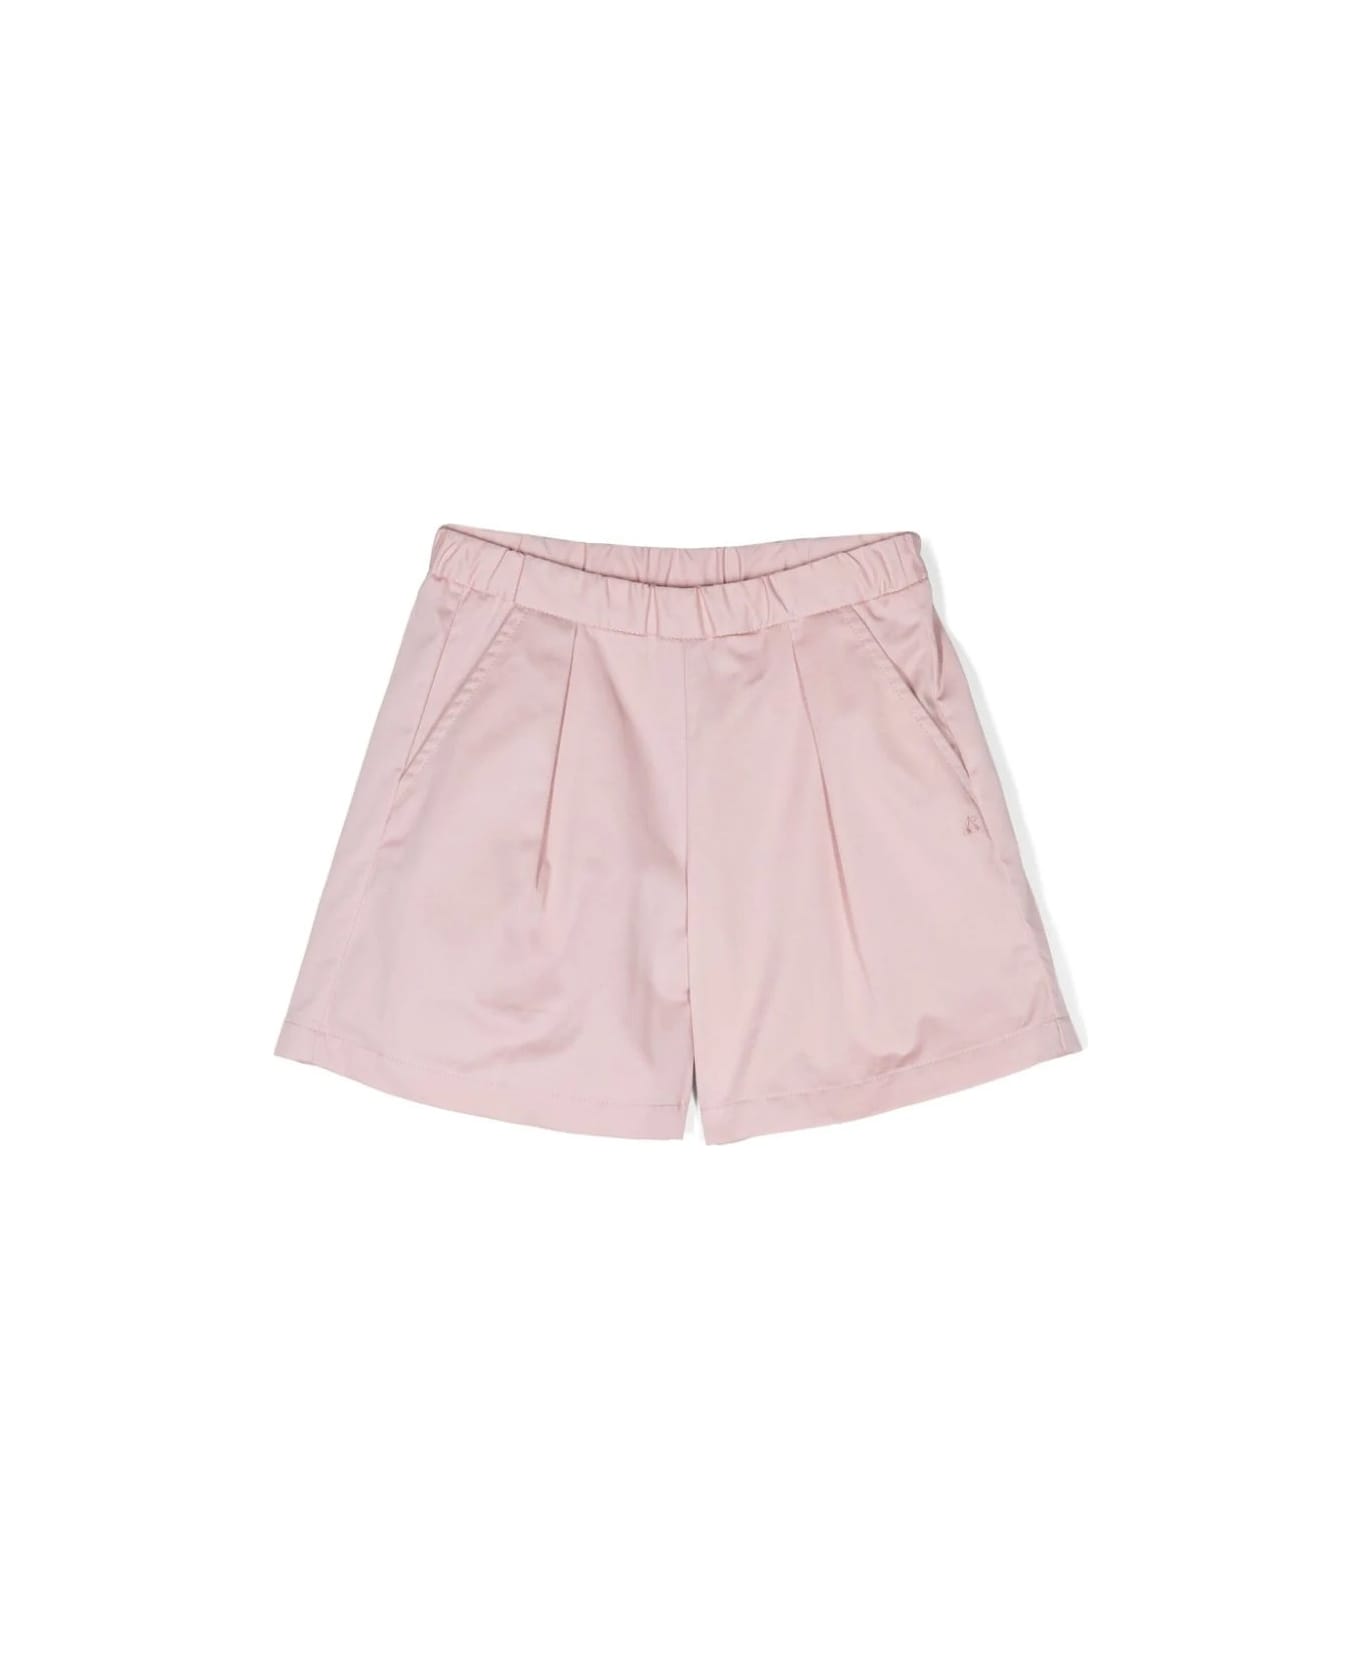 Bonpoint Faded Pink Courtney Shorts - Pink